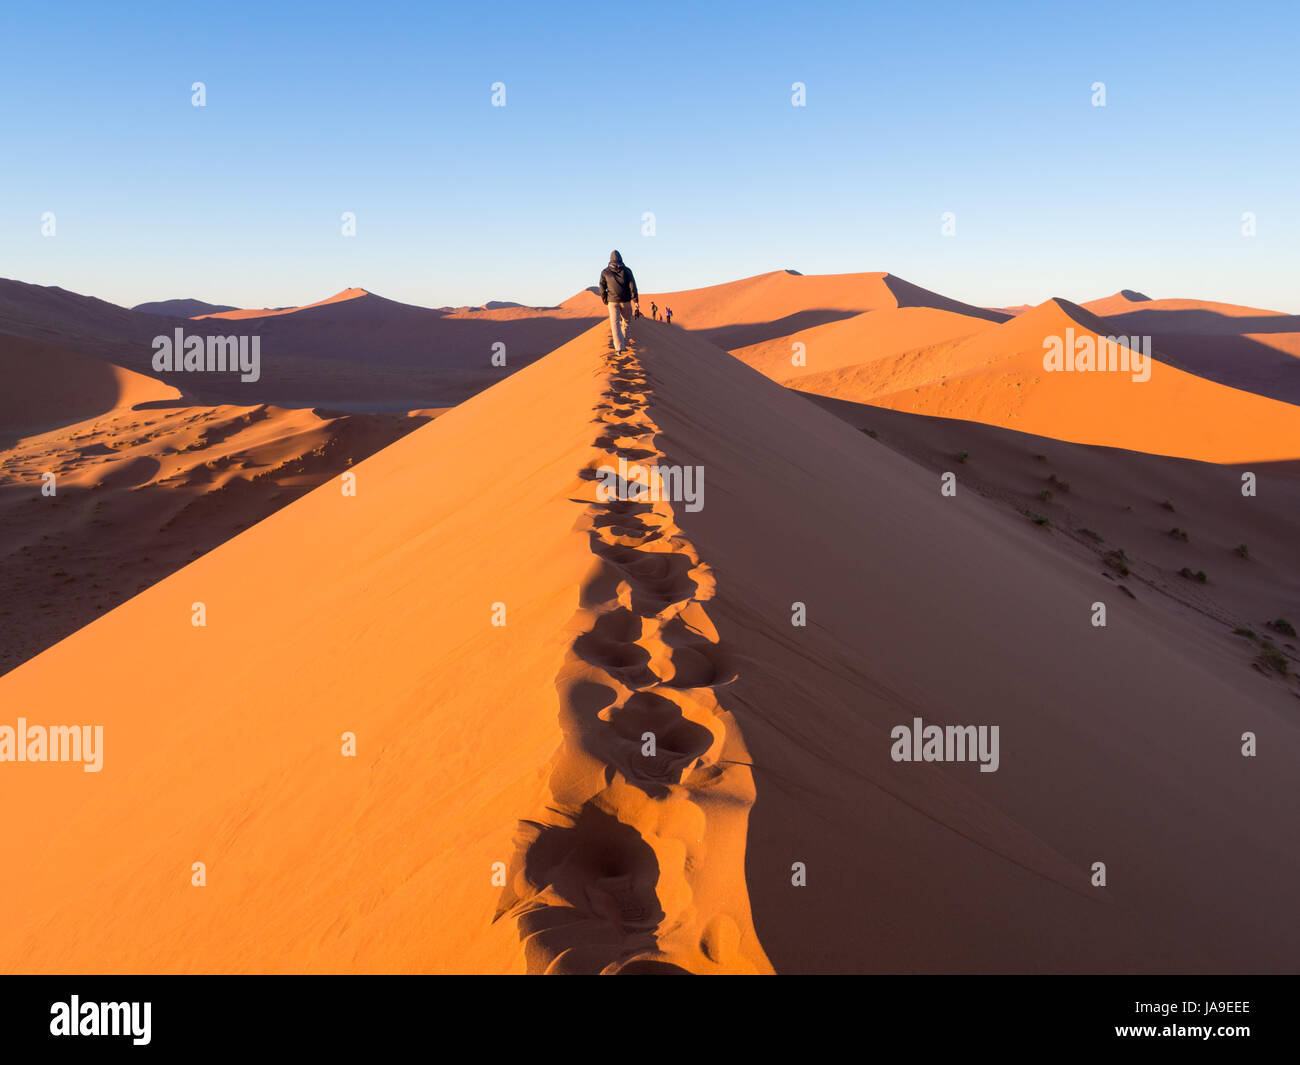 SOUSSUSVLEI, NAMIBIA - JUNE 20, 2016: People watching sunrise form the Dune 45 in the Sossusvlei area of the Namib Desert in Namibia. Stock Photo